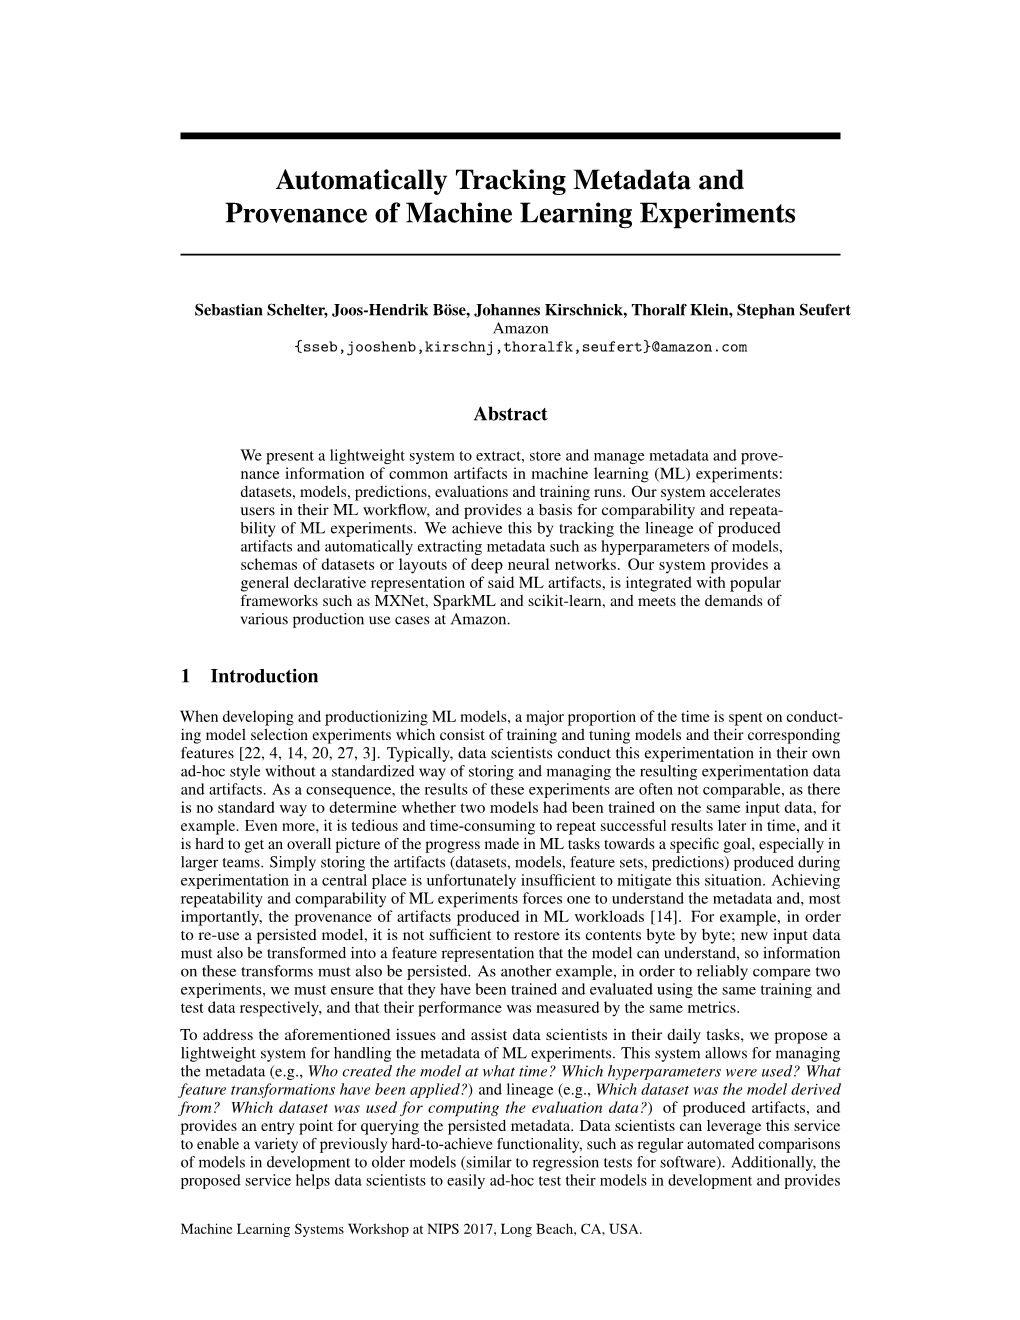 Automatically Tracking Metadata and Provenance of Machine Learning Experiments